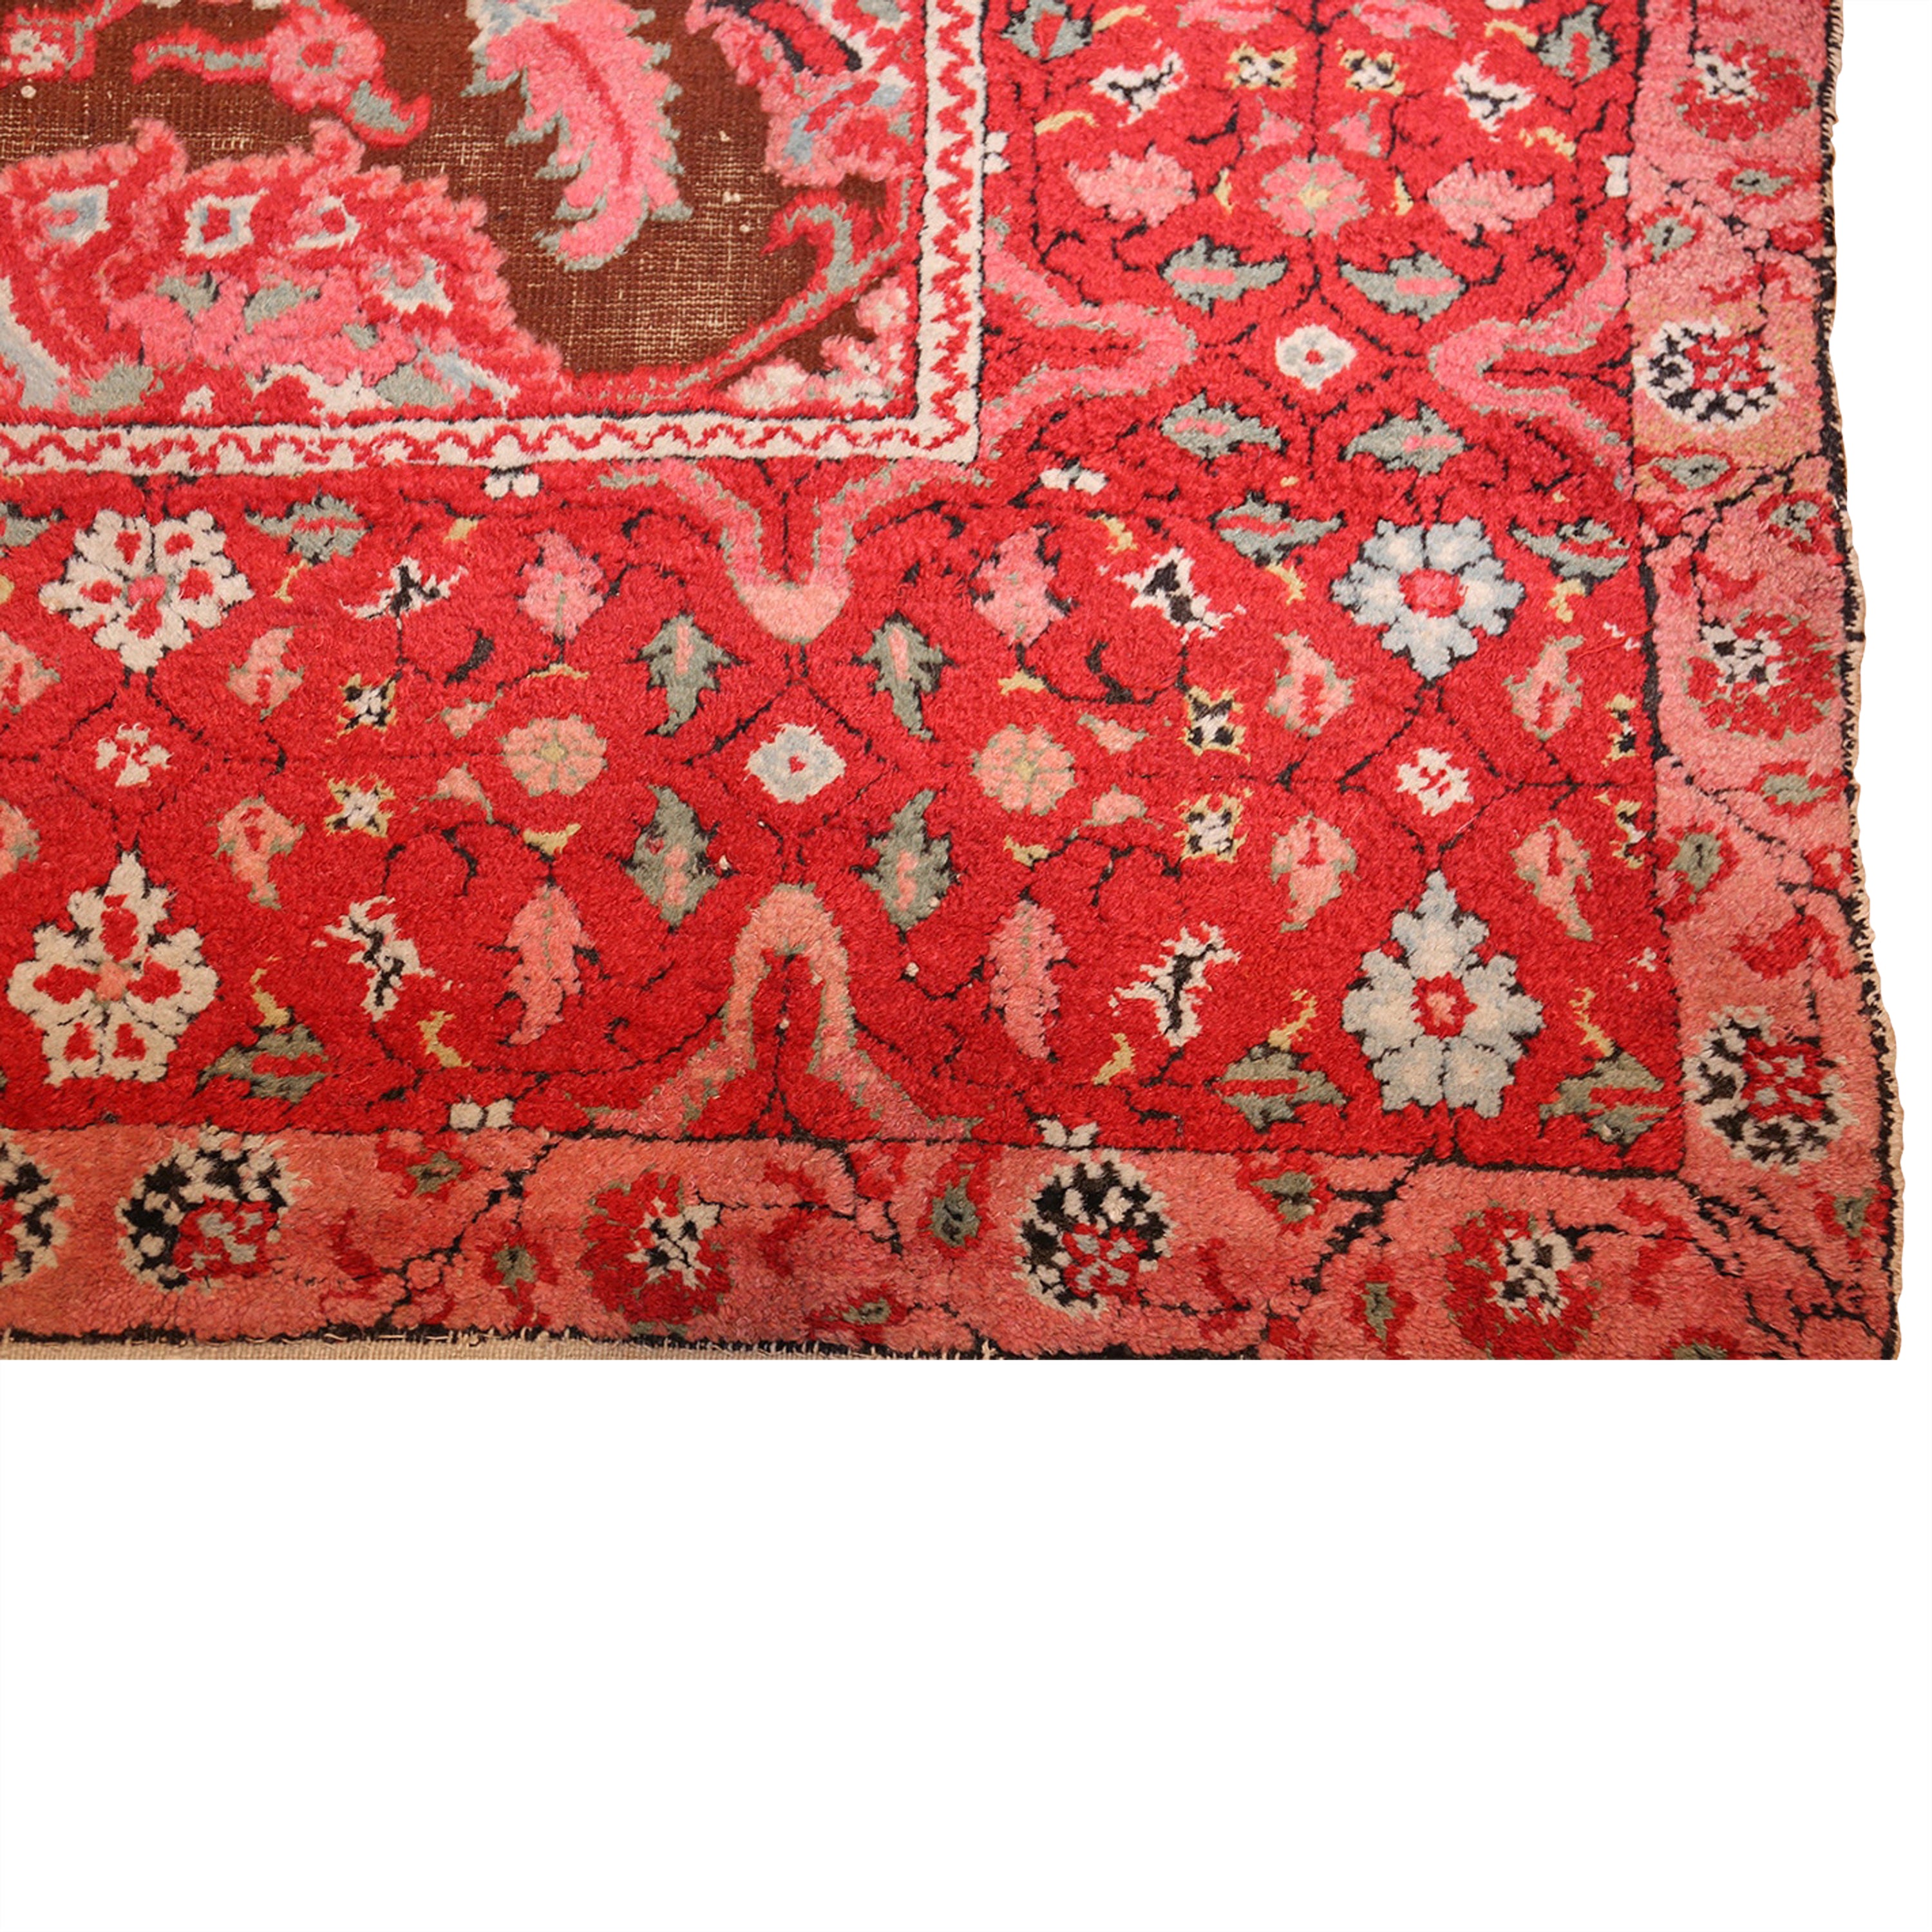 Red Antique Traditional Indian Agra Rug - 4'1" x 7'3"